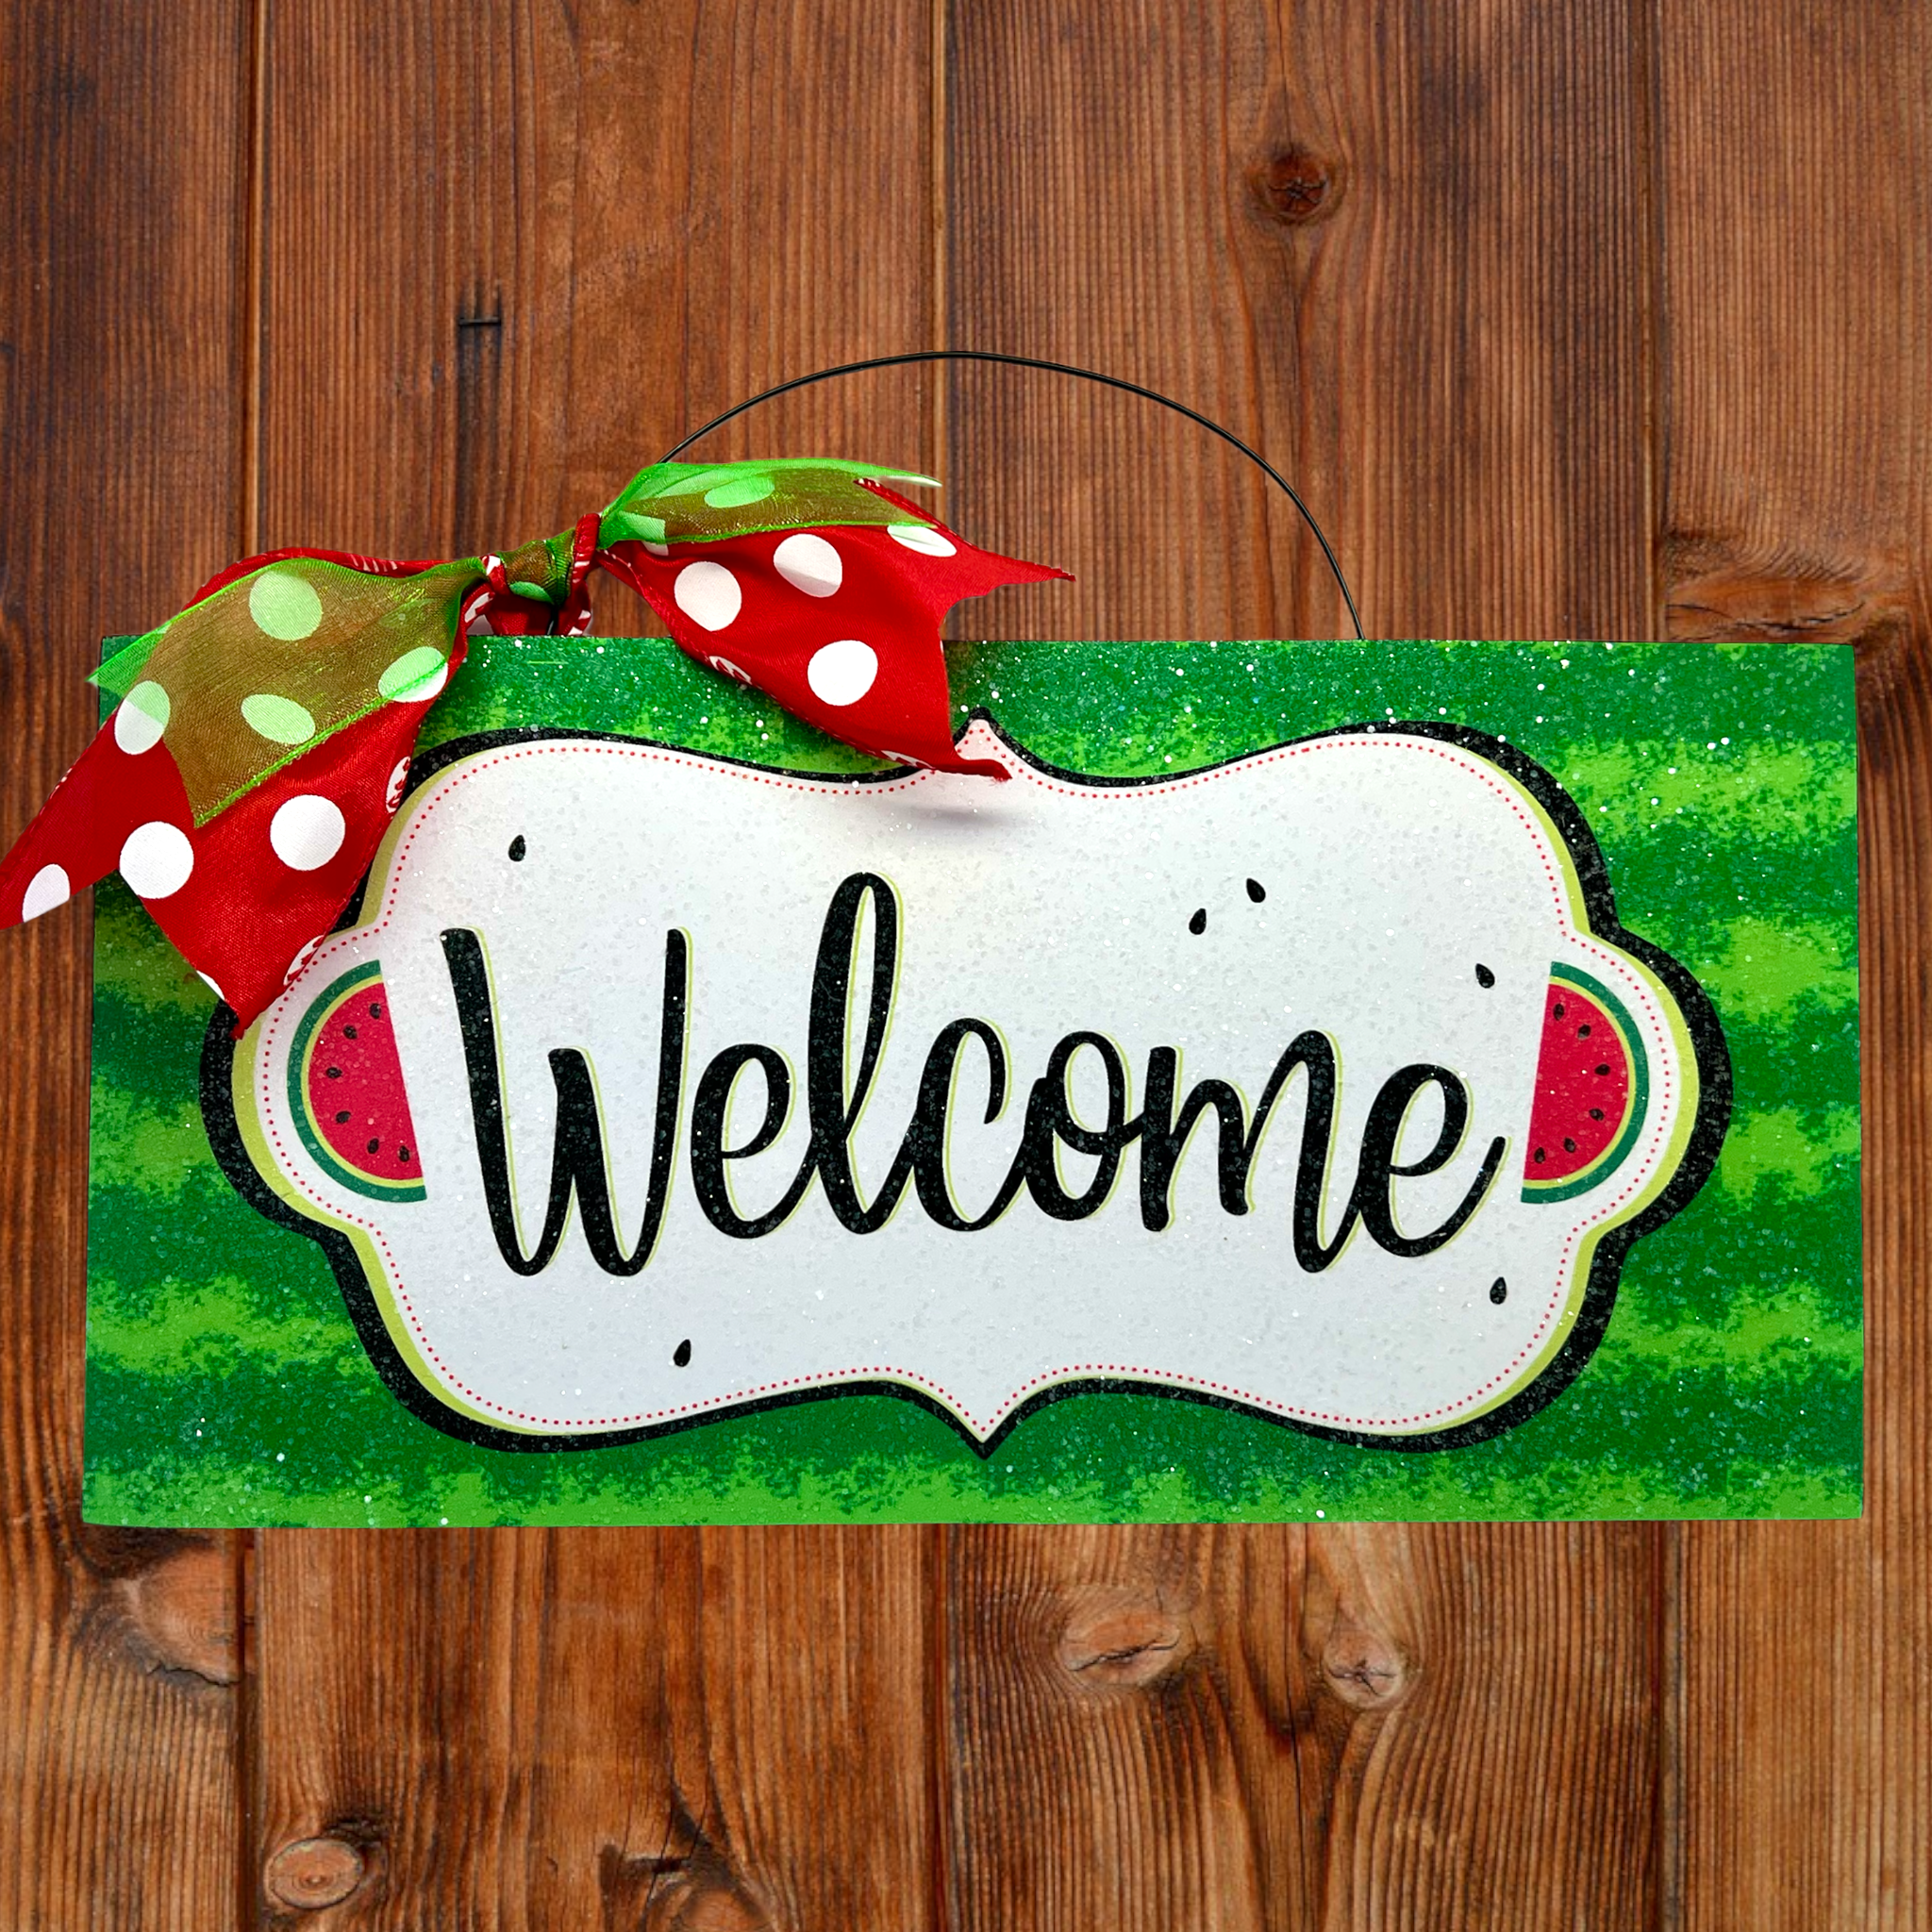 Welcome sign. Watermelon print with polka dots and glitter.